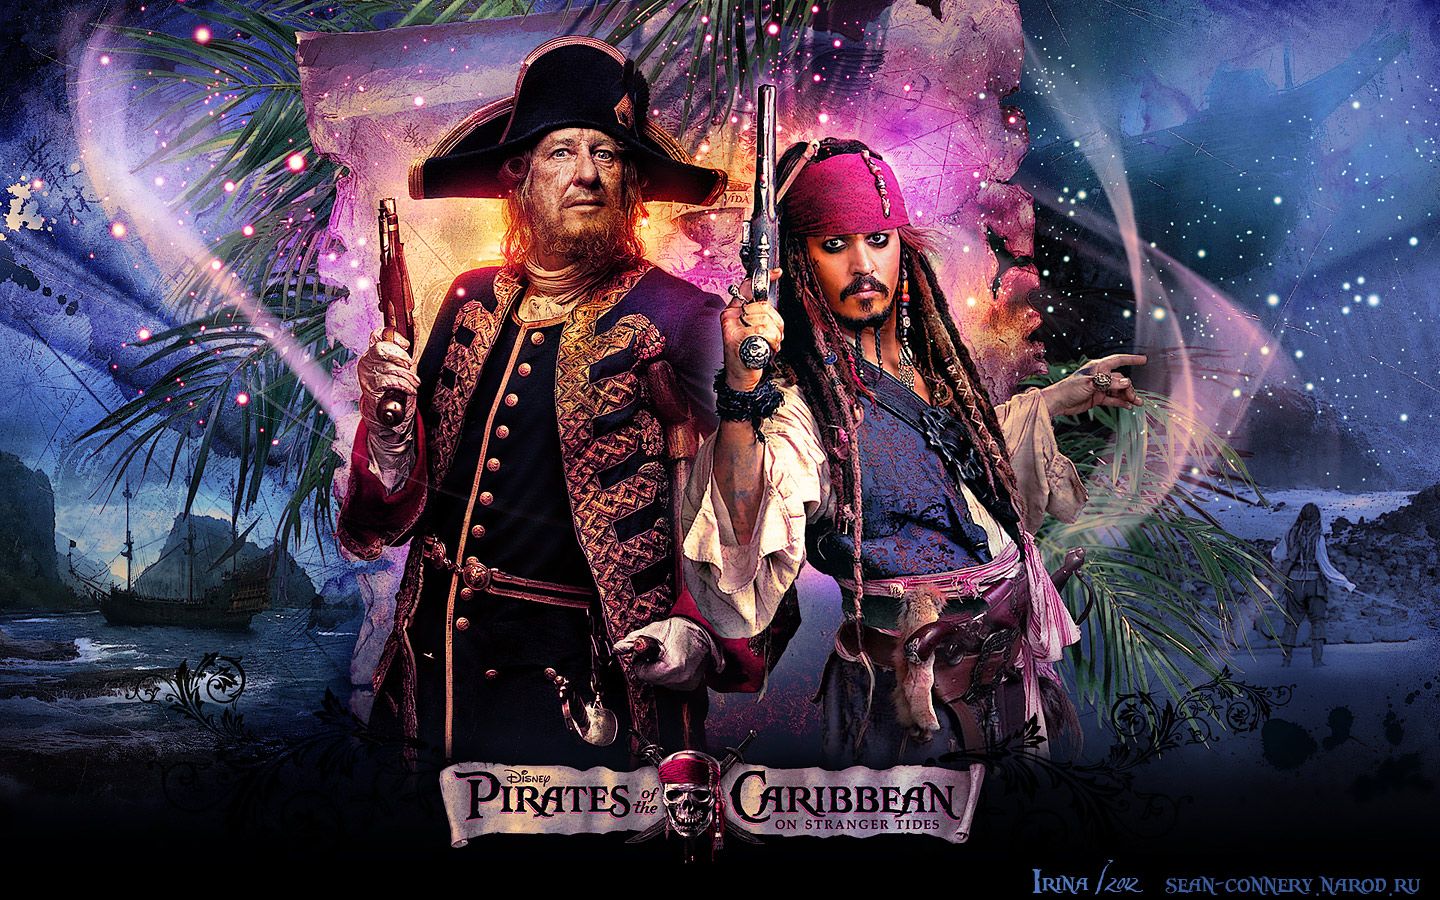 POTC wallpapers - Pirates of the Caribbean Wallpaper (32851118 ...